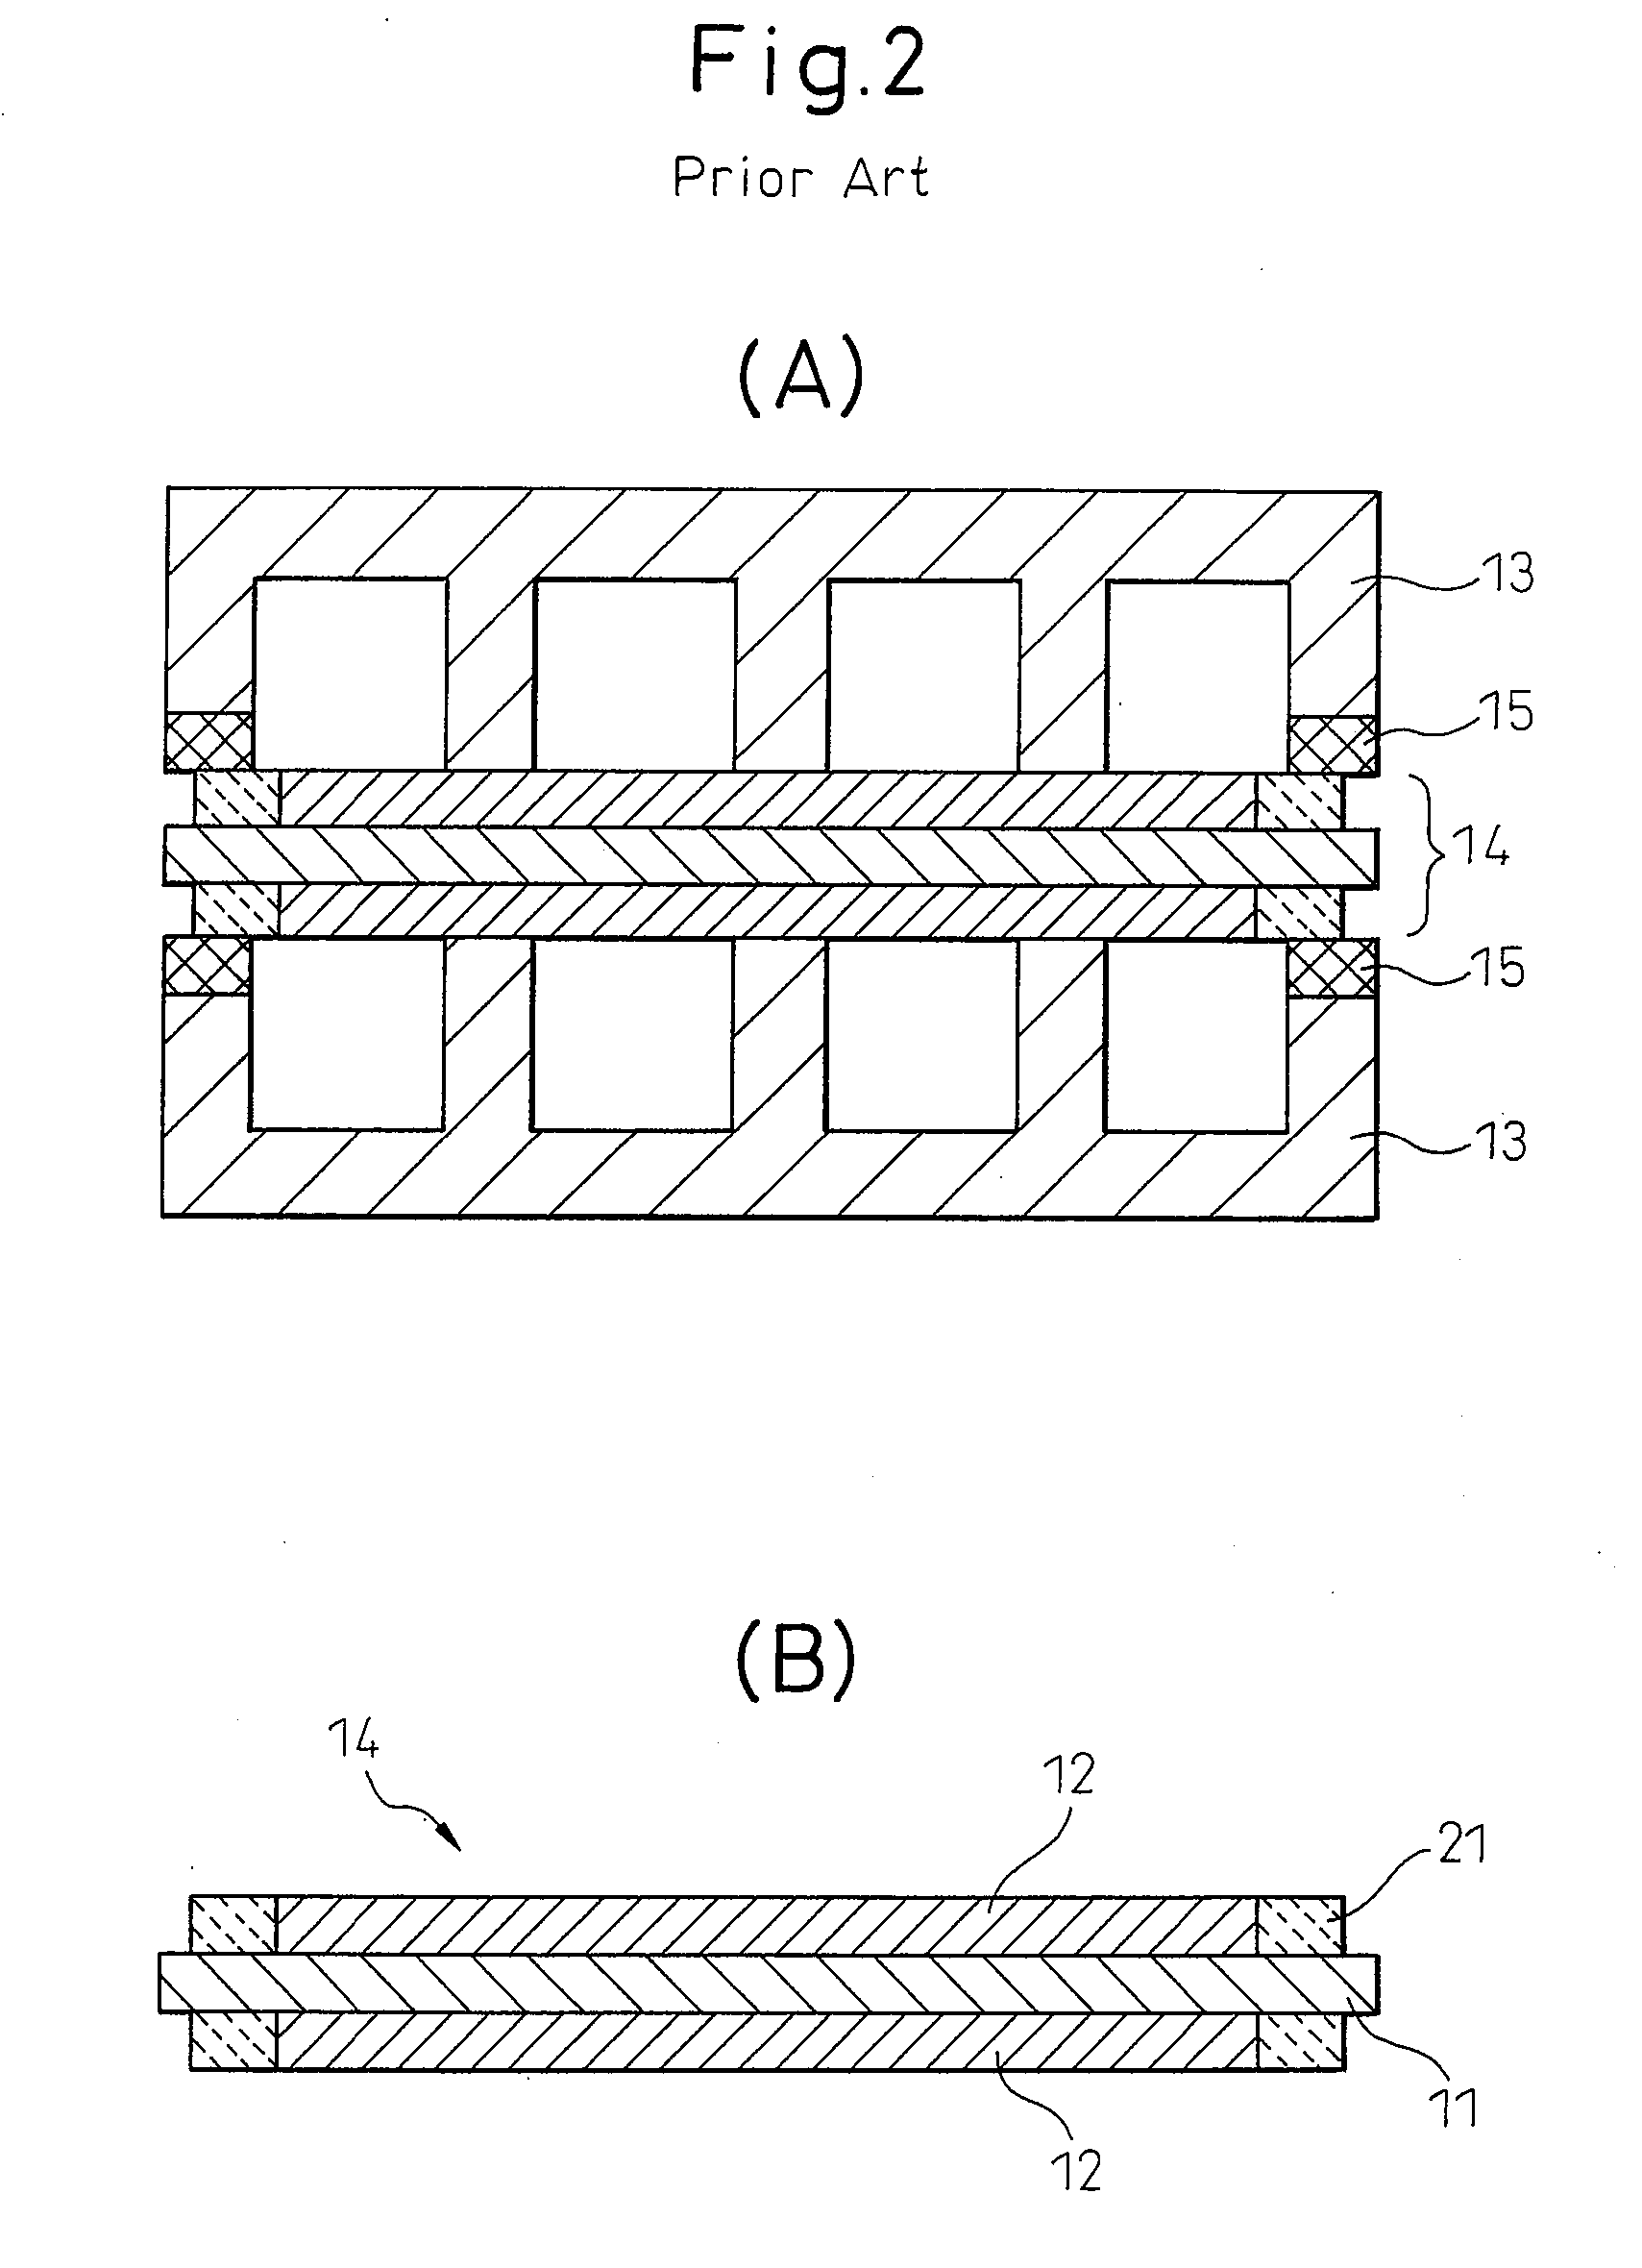 Membrane Electrode Assembly, Method For Producing The Same, and Solid Polymer Fuel Cell Using The Same